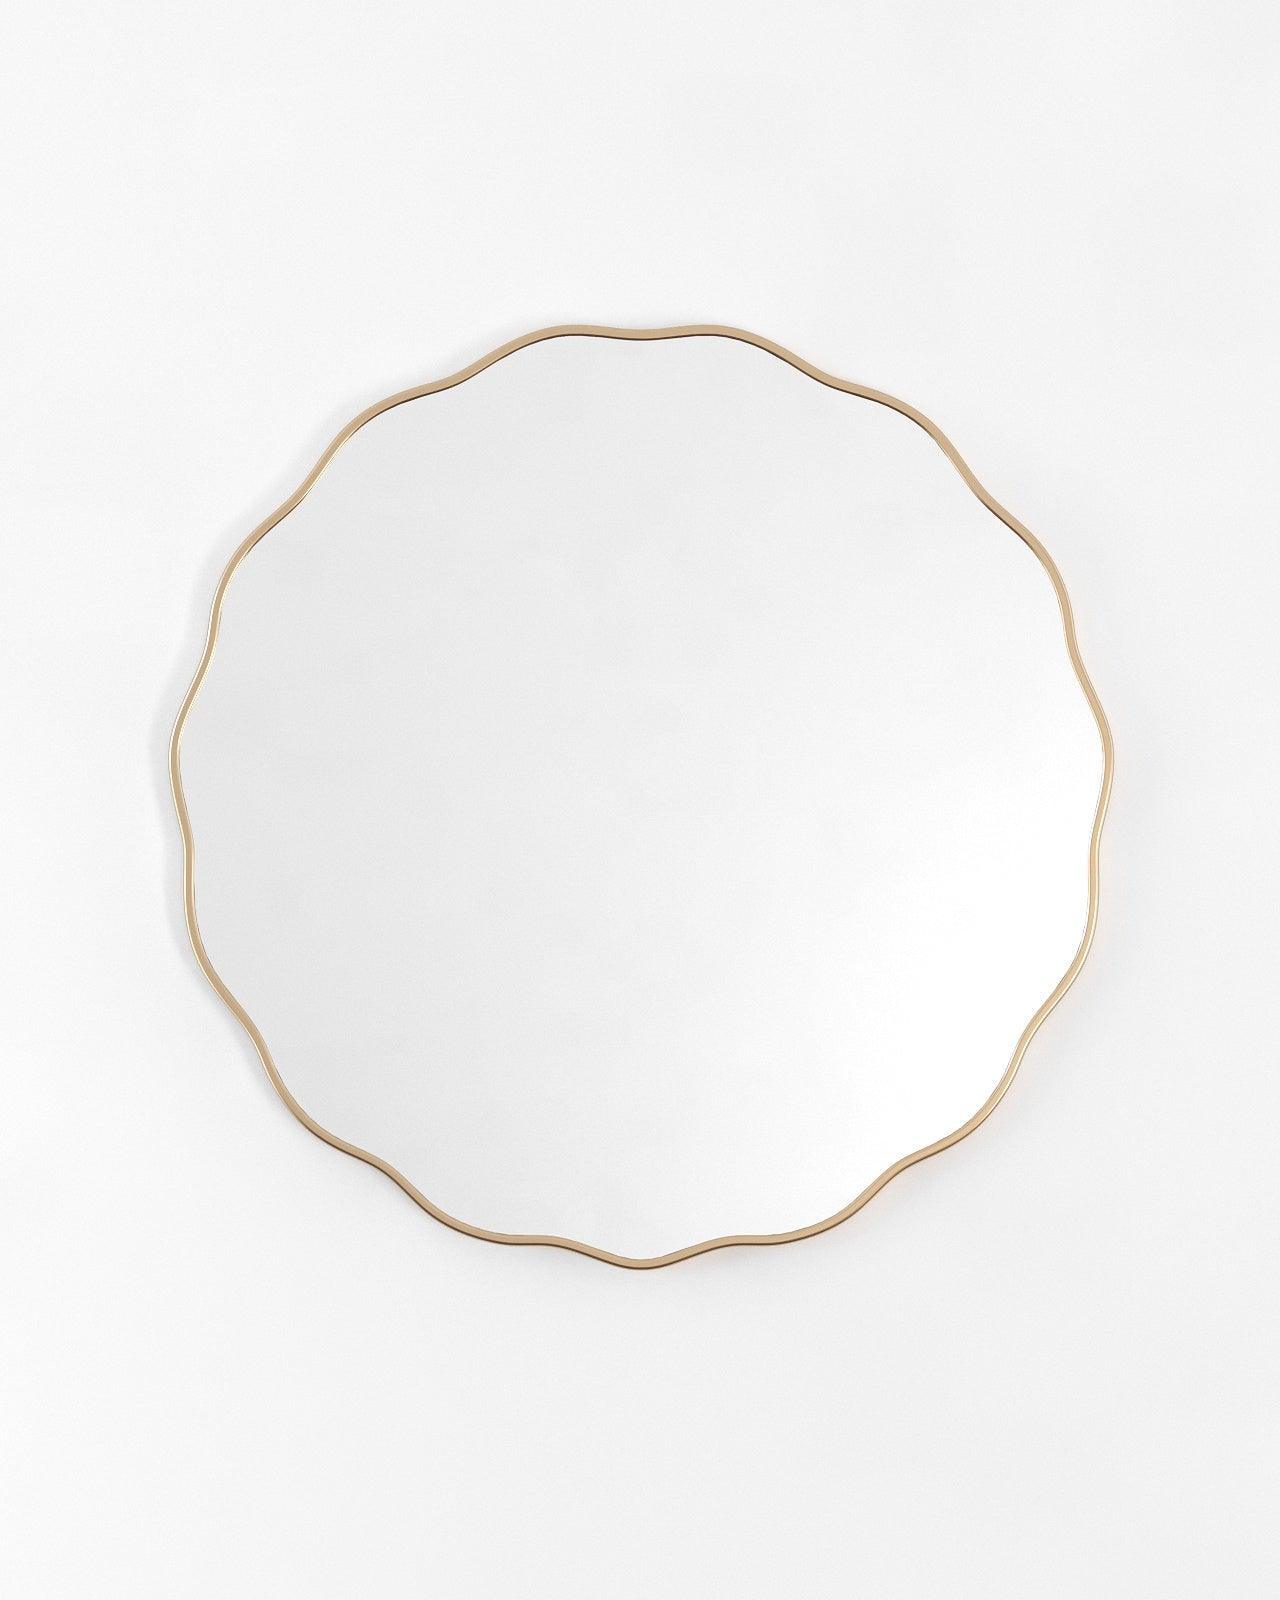 Joy Wall Mirror by Irregular Mirrors Collection